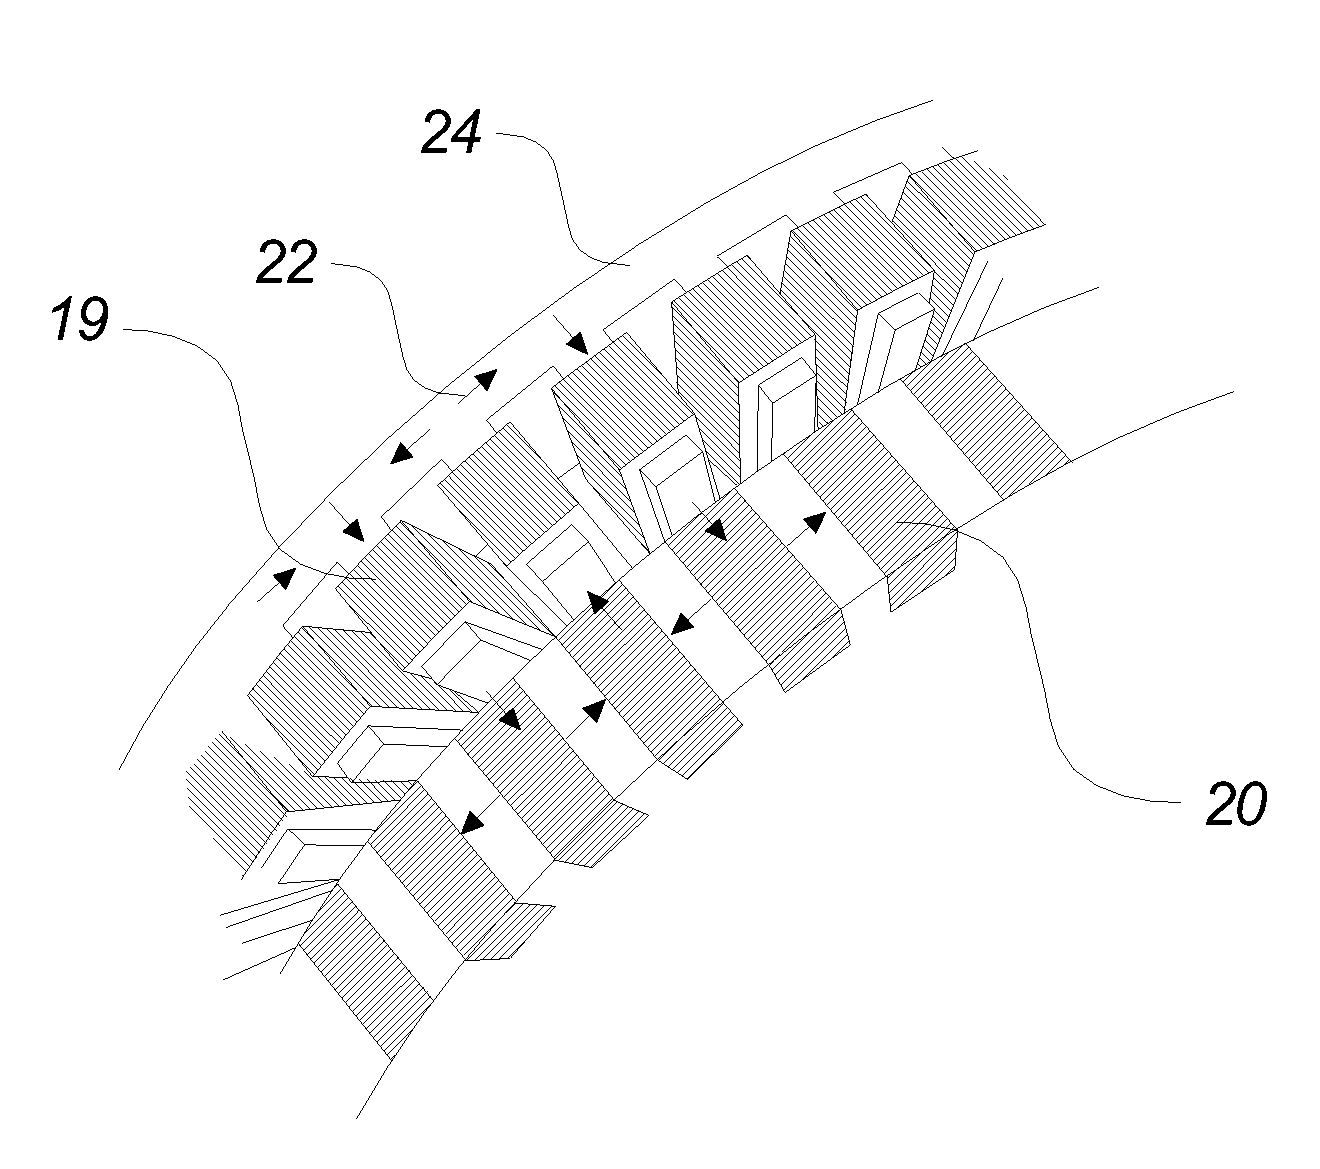 Method For Estimating The Magnetization Level Of One Or More Permanent Magnets Established In One Or More Permanent Magnet Rotors Of A Wind Turbine Generator And Wind Turbine